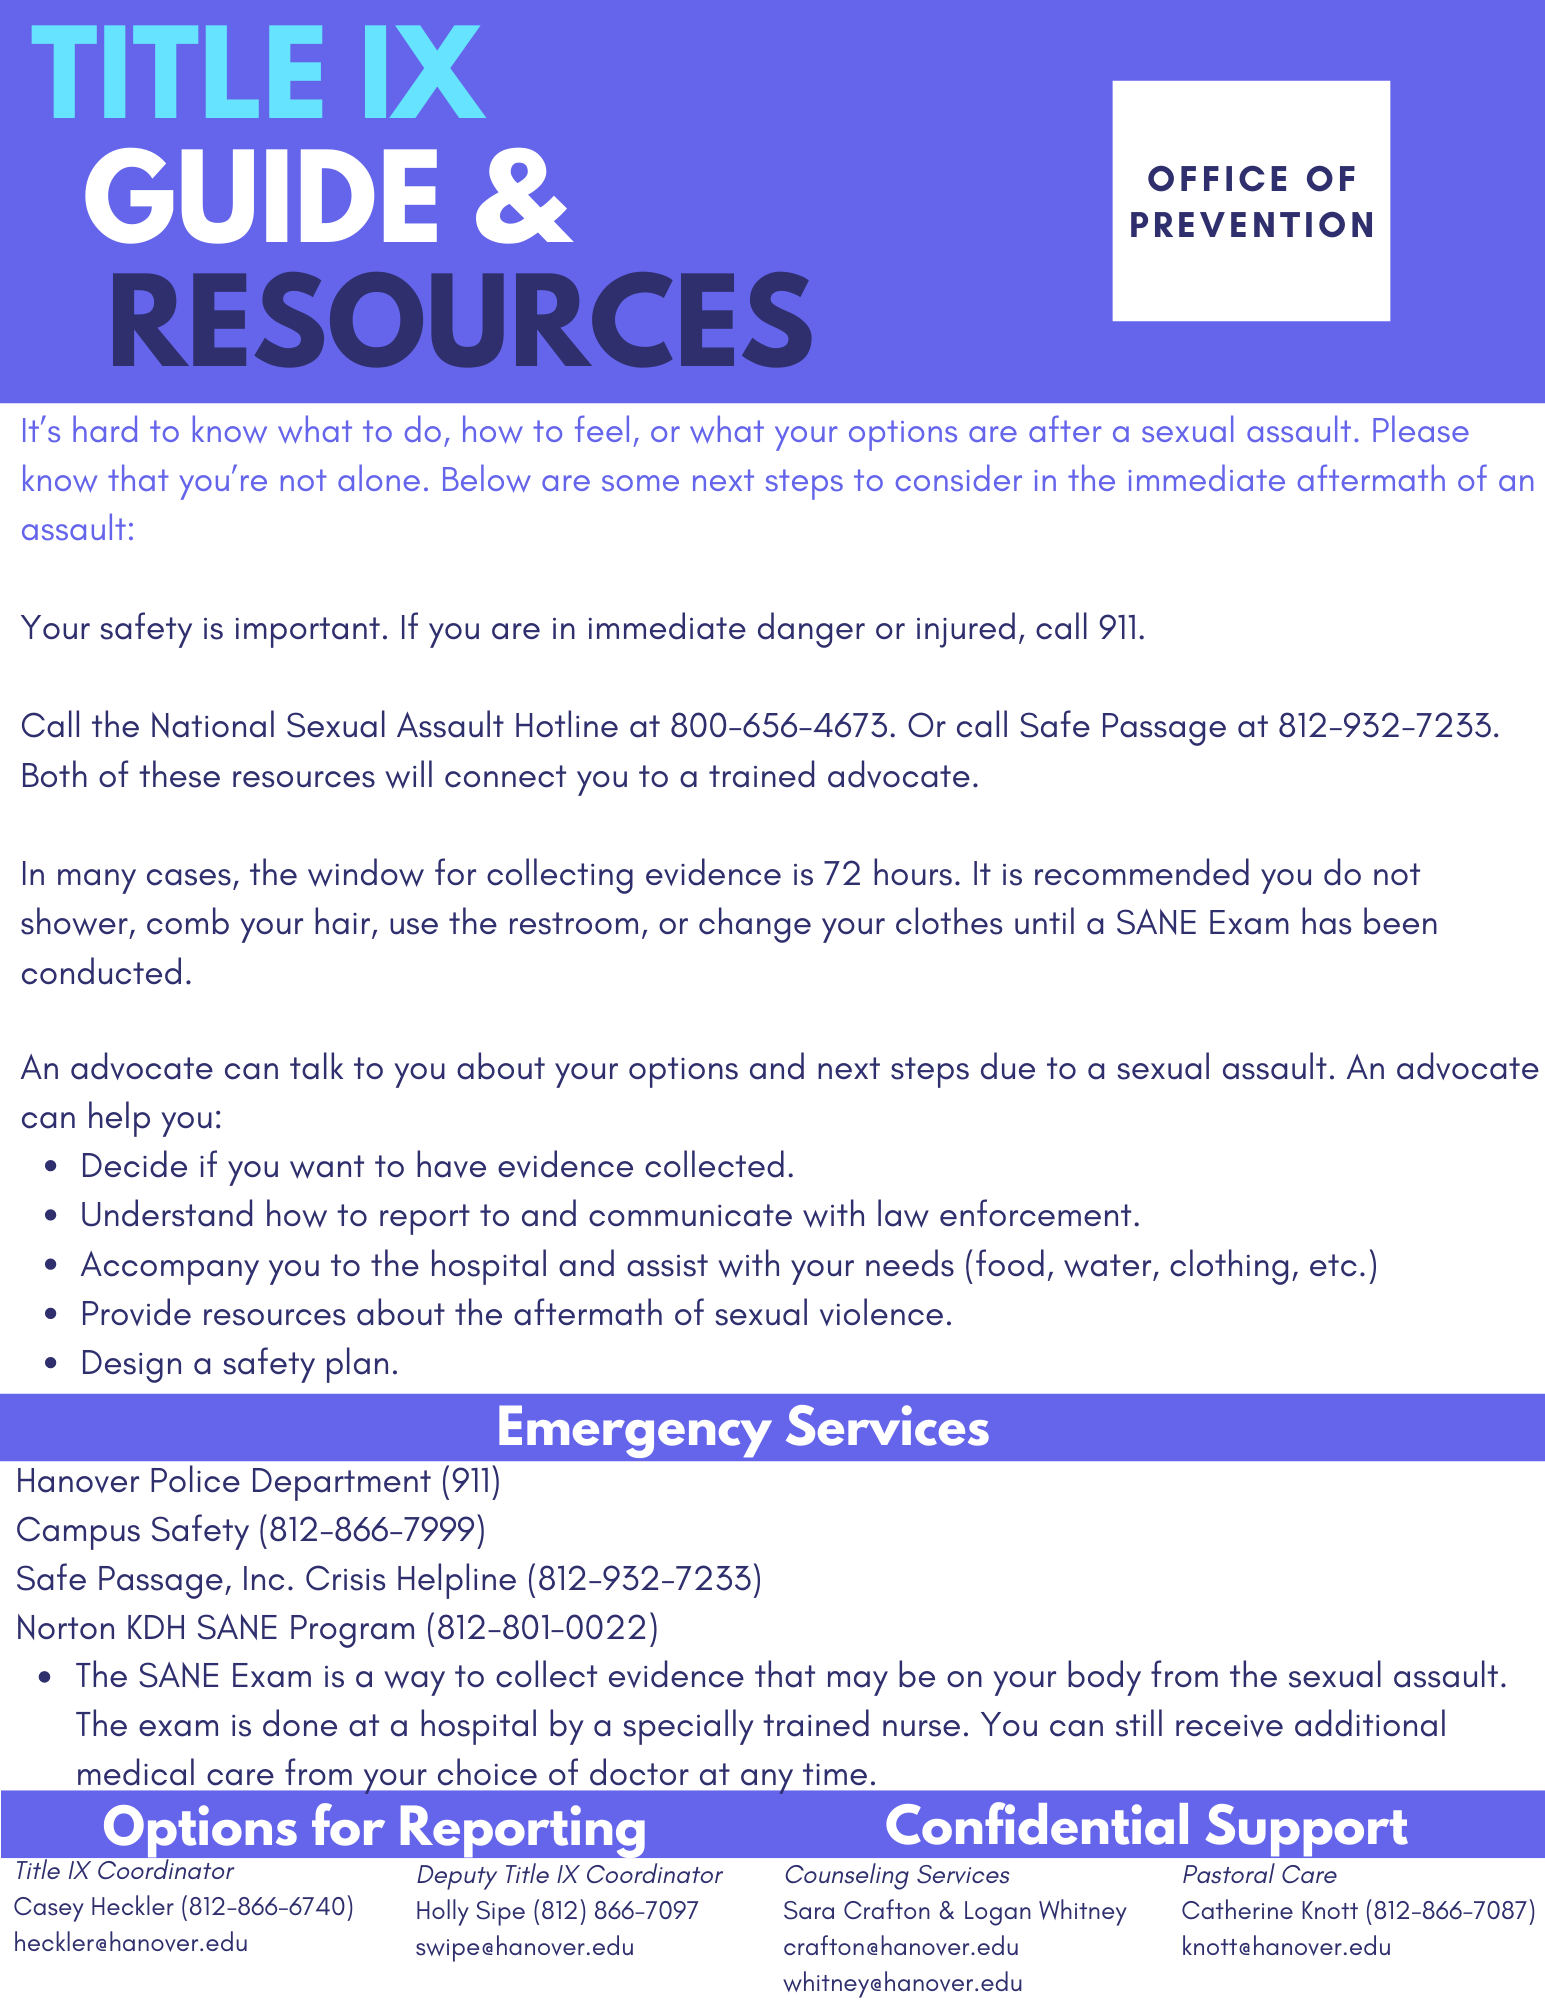 Sexual Misconduct And Violence Prevention Resources And Services